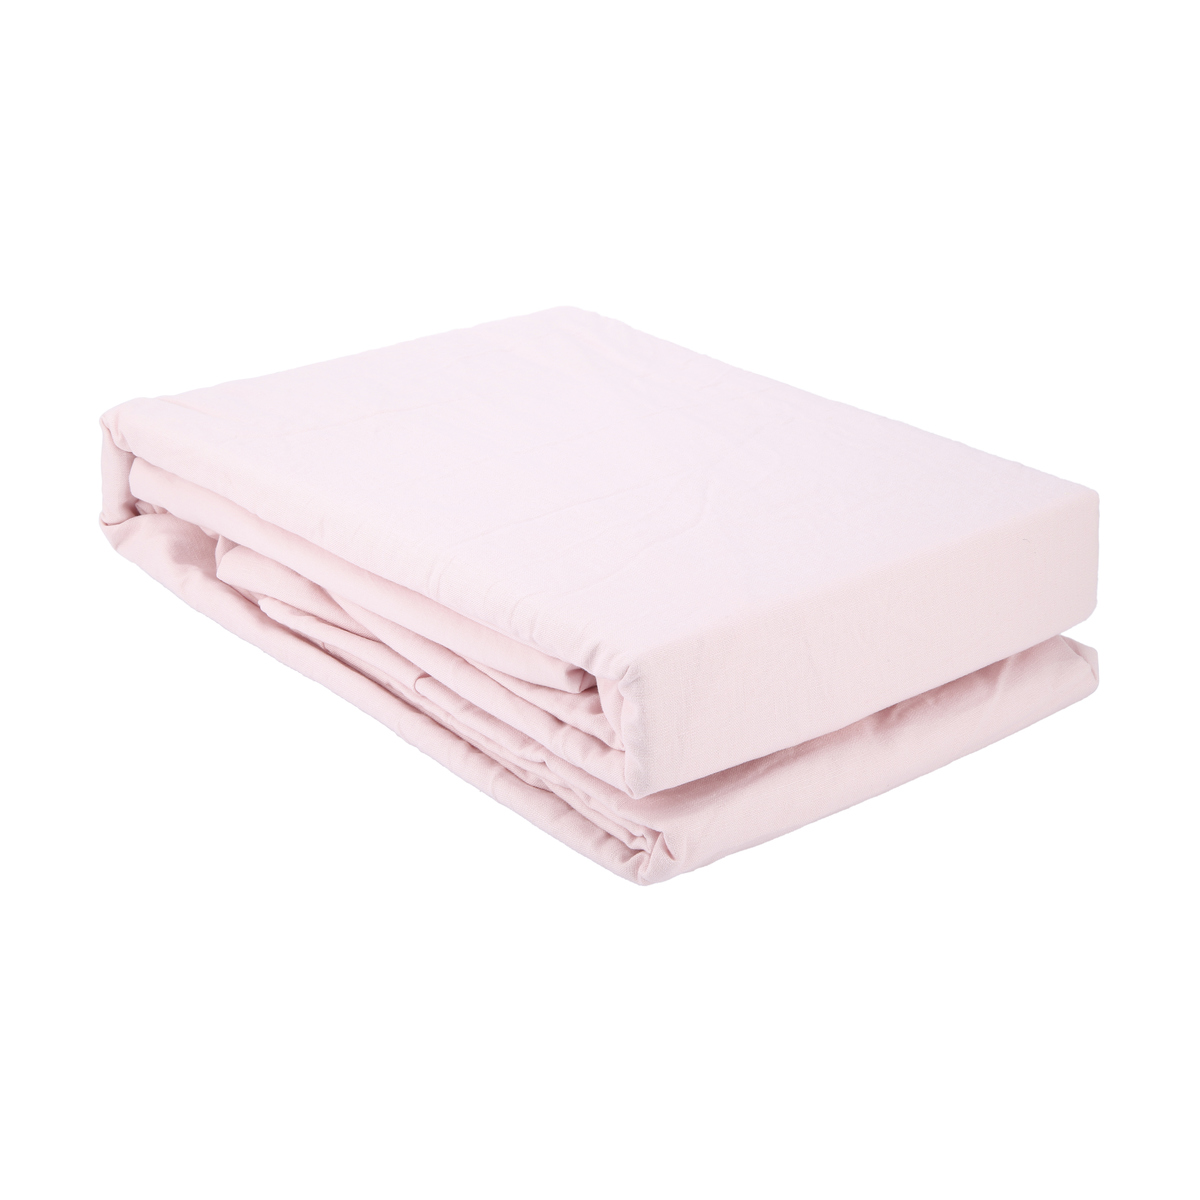 Felicia Quilt Cover Set - Double Bed, Pink | Kmart